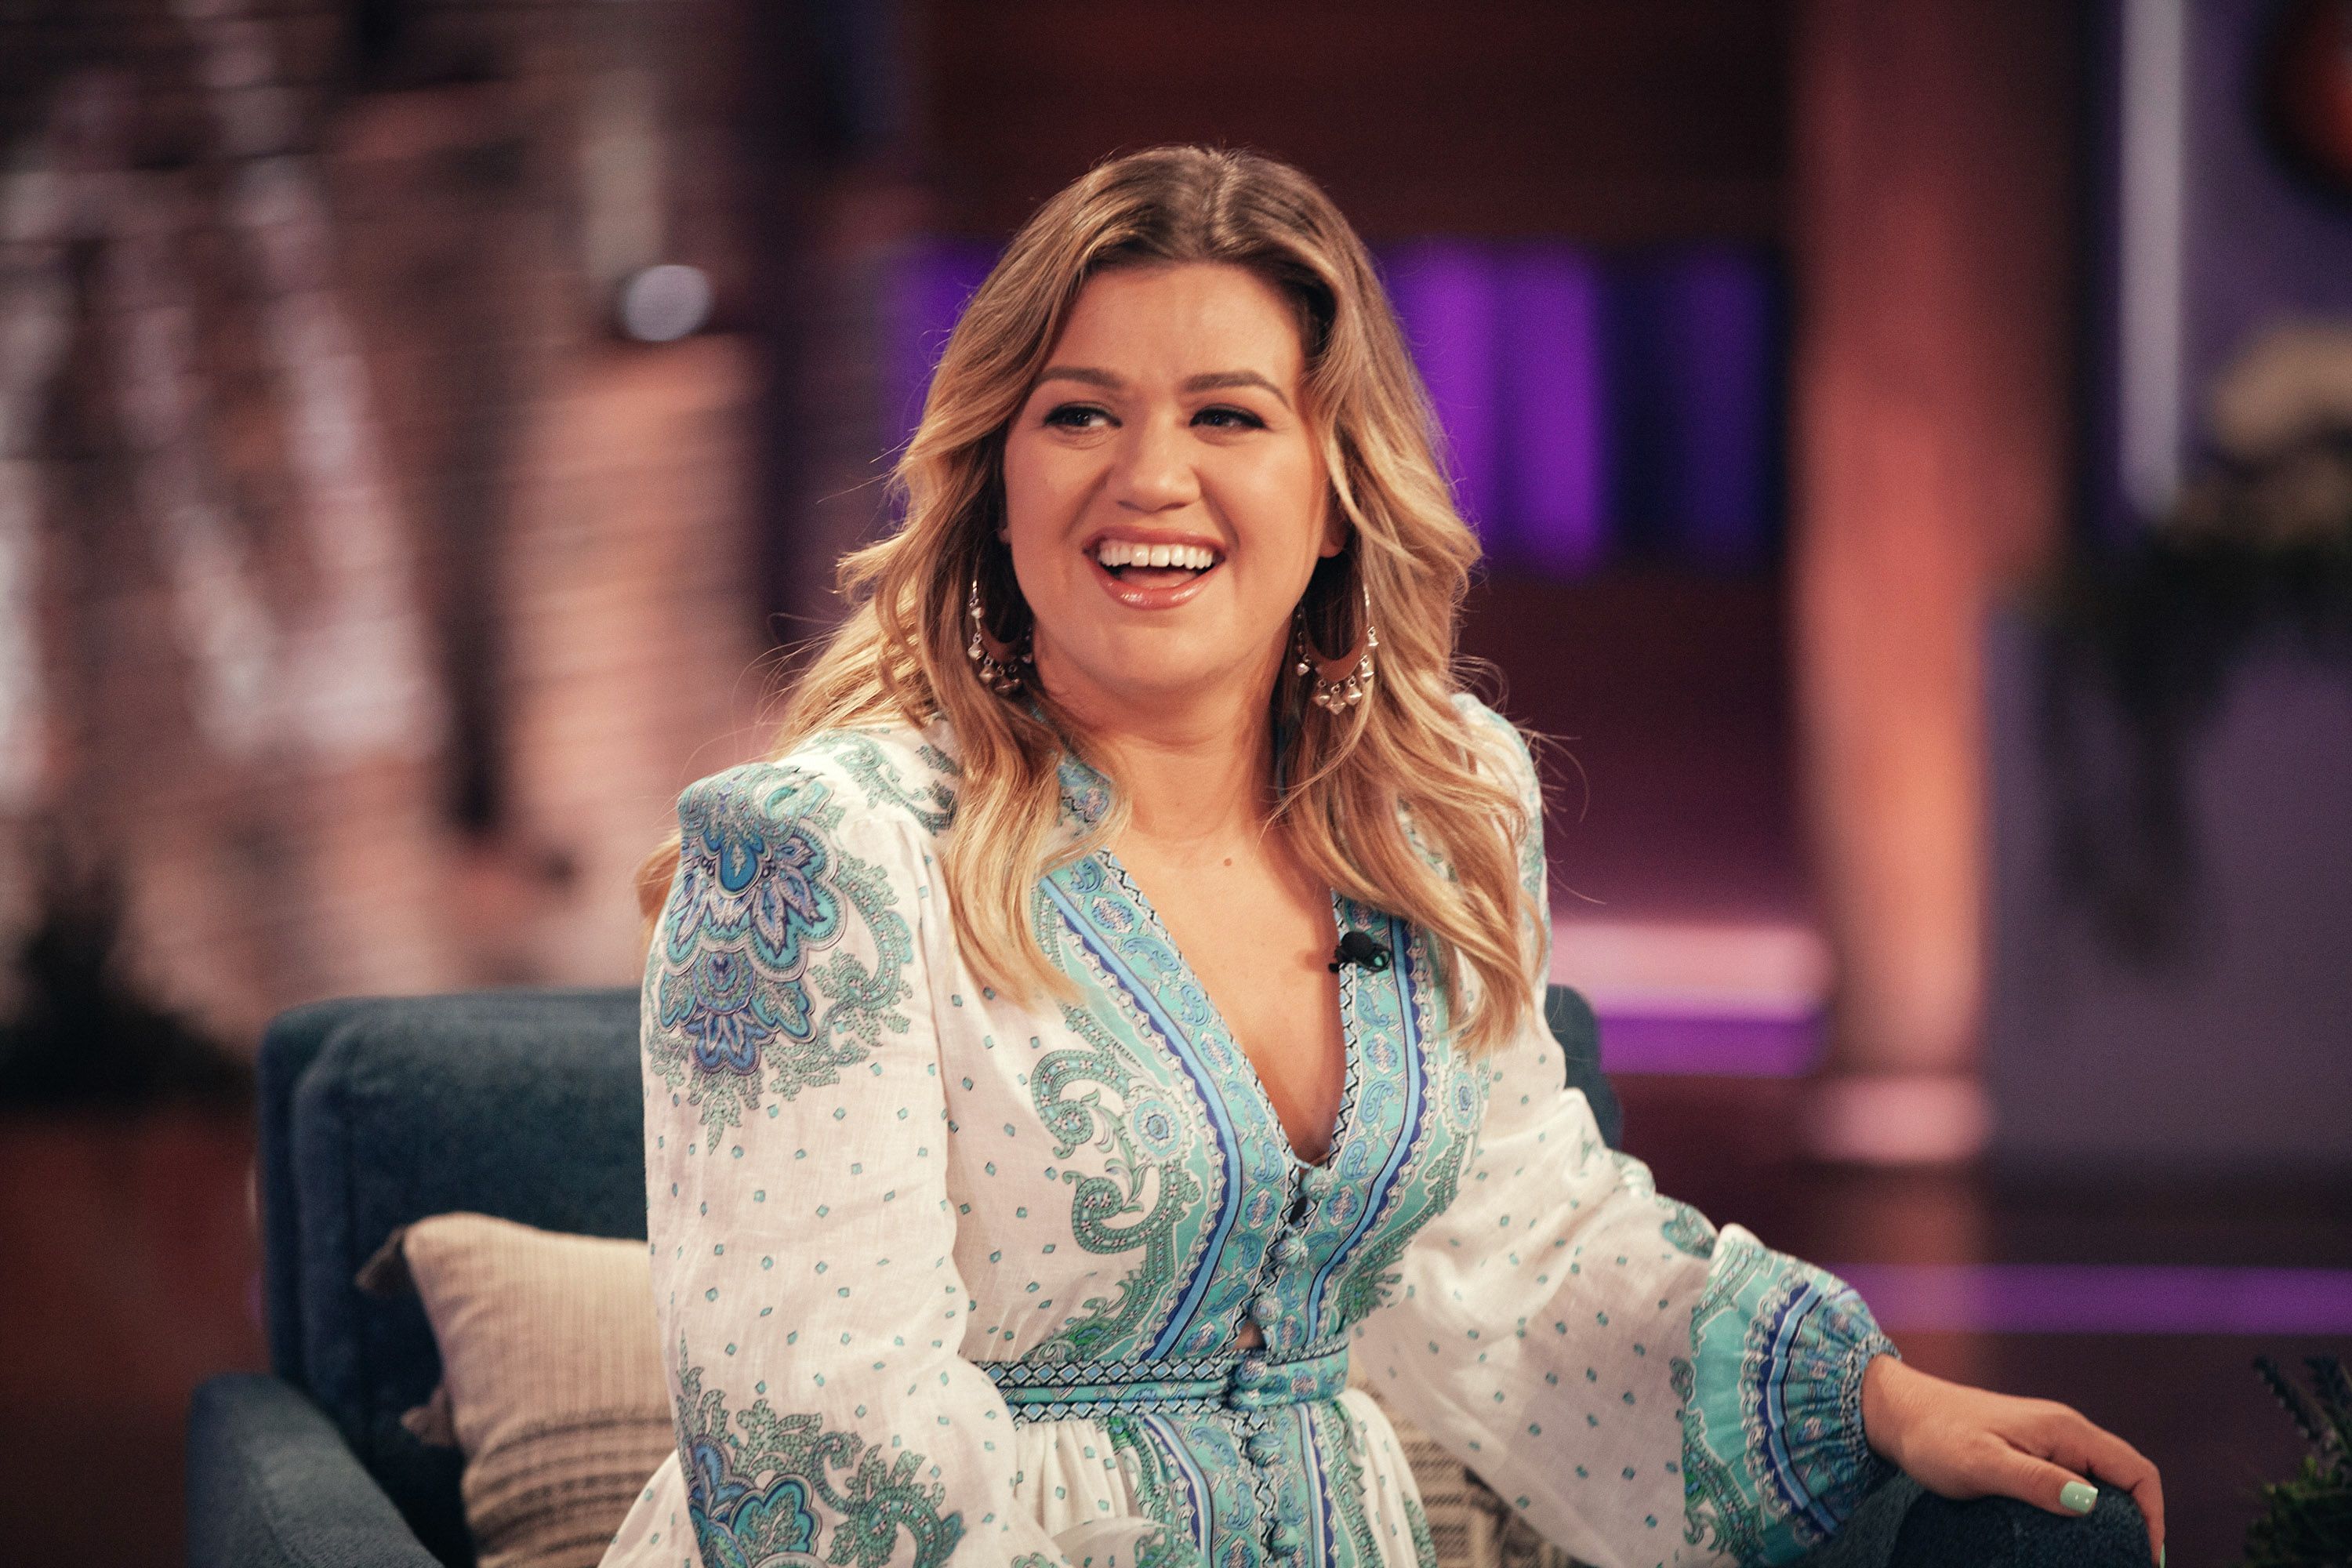 Lattouf Hair and Day Spa: Happy Birthday to the Beautiful Kelly Clarkson